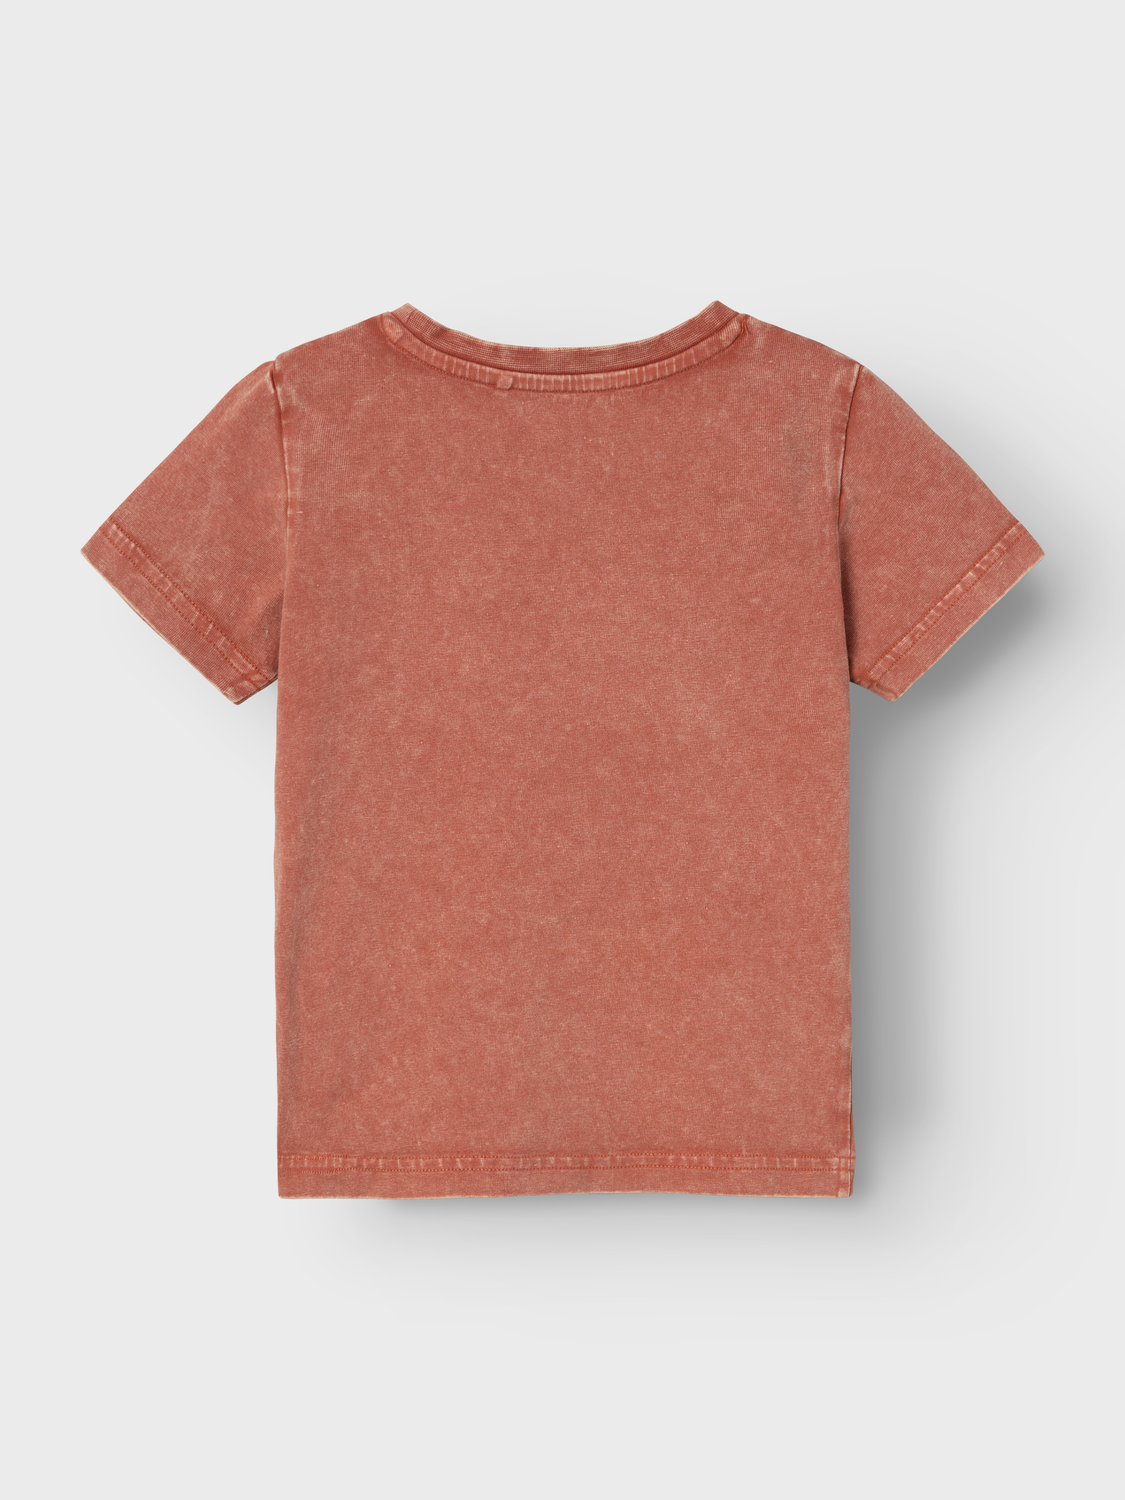 NMMTHULE T-Shirts & Tops - Baked Clay